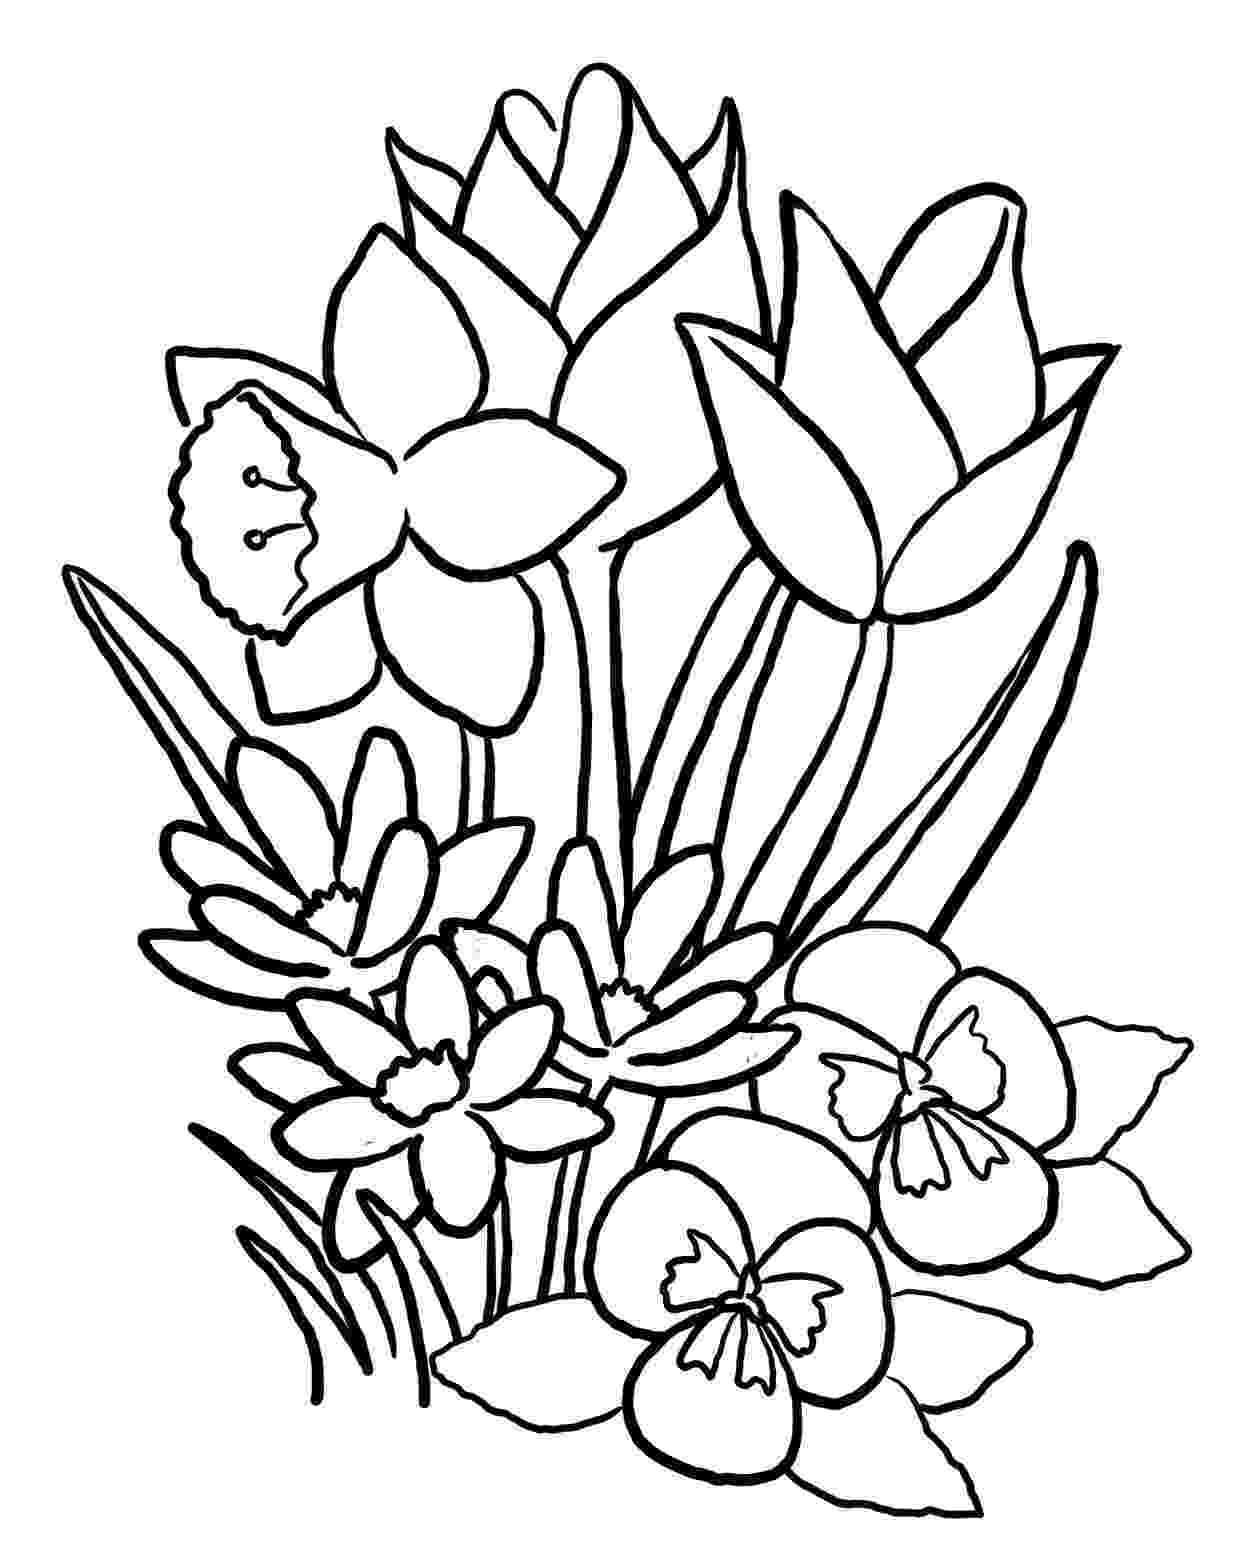 free printable coloring pages flowers free printable flower coloring pages for kids cool2bkids pages printable free coloring flowers 